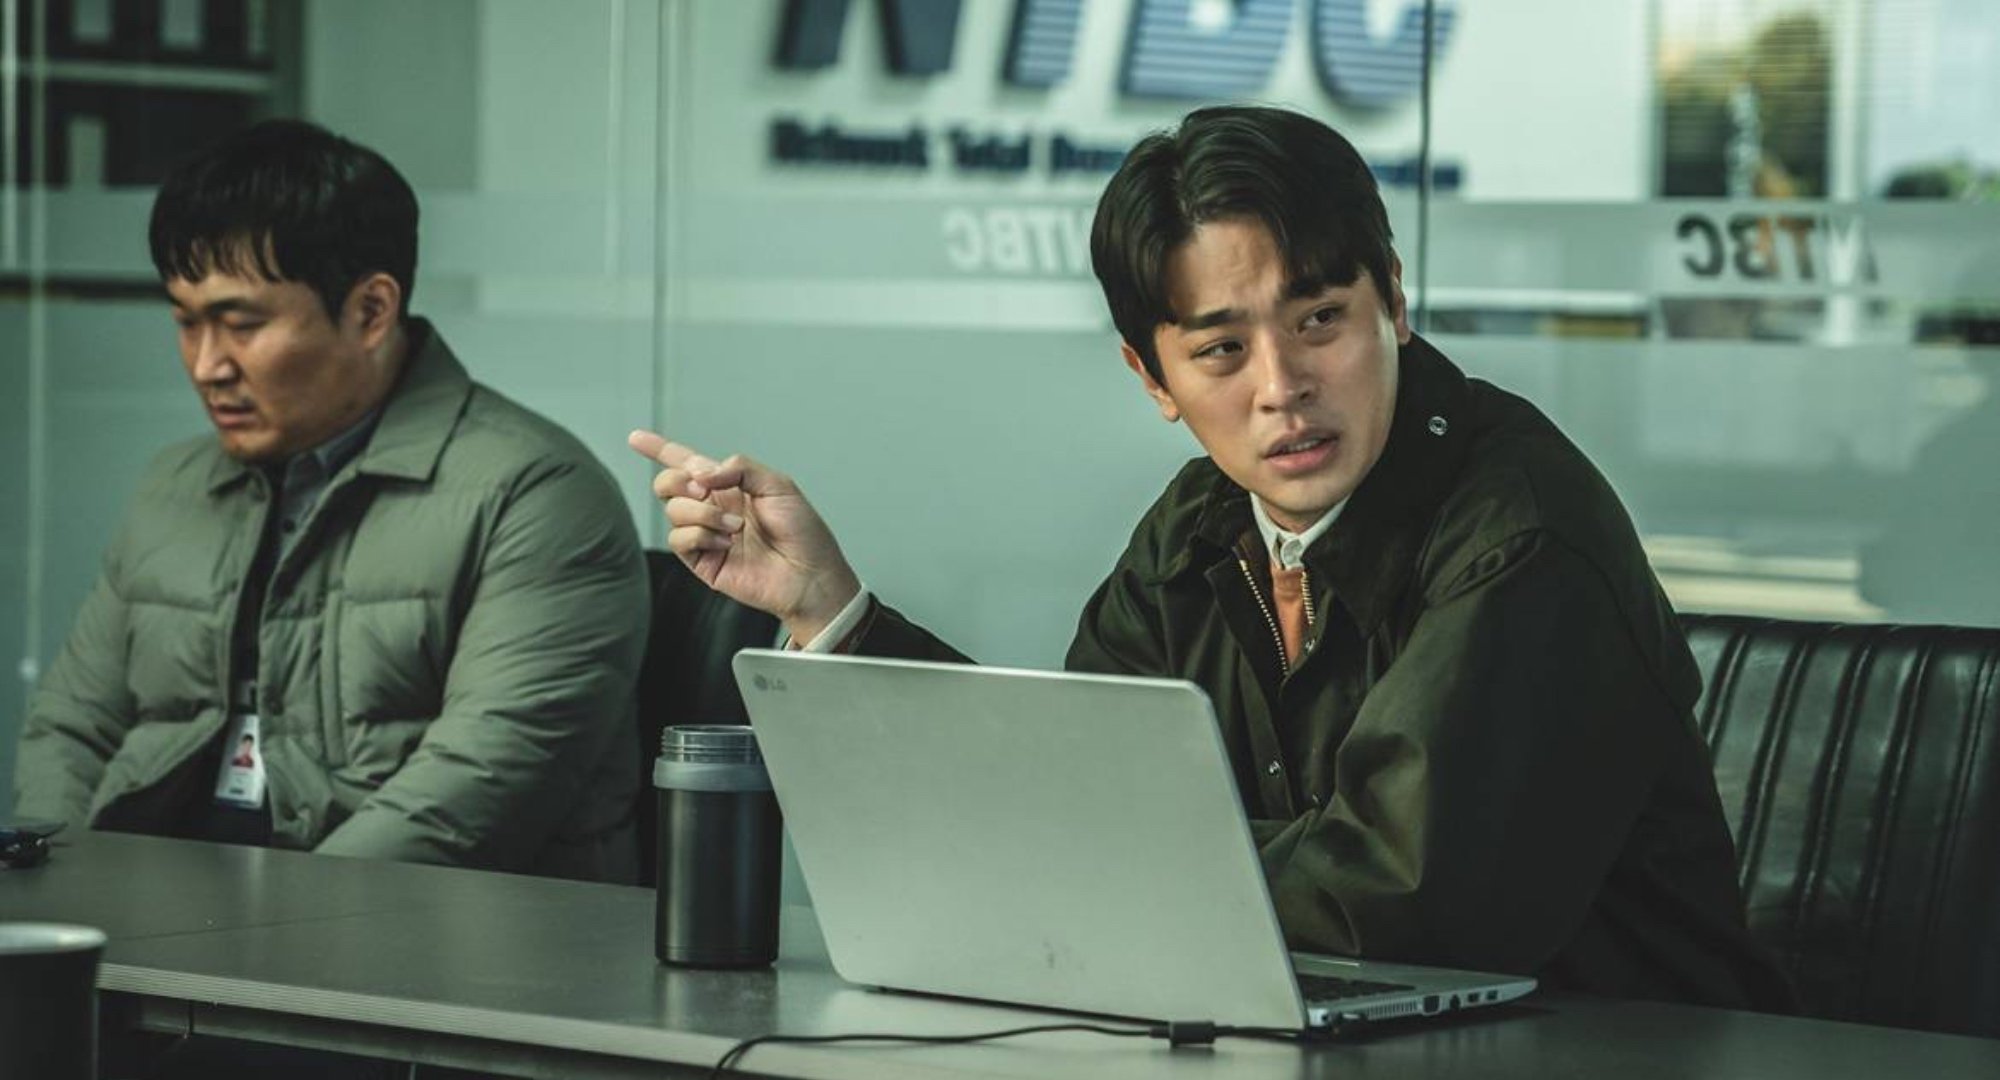 Main character Bae Young-ae from Netflix's 'Hellbound' in work meeting.